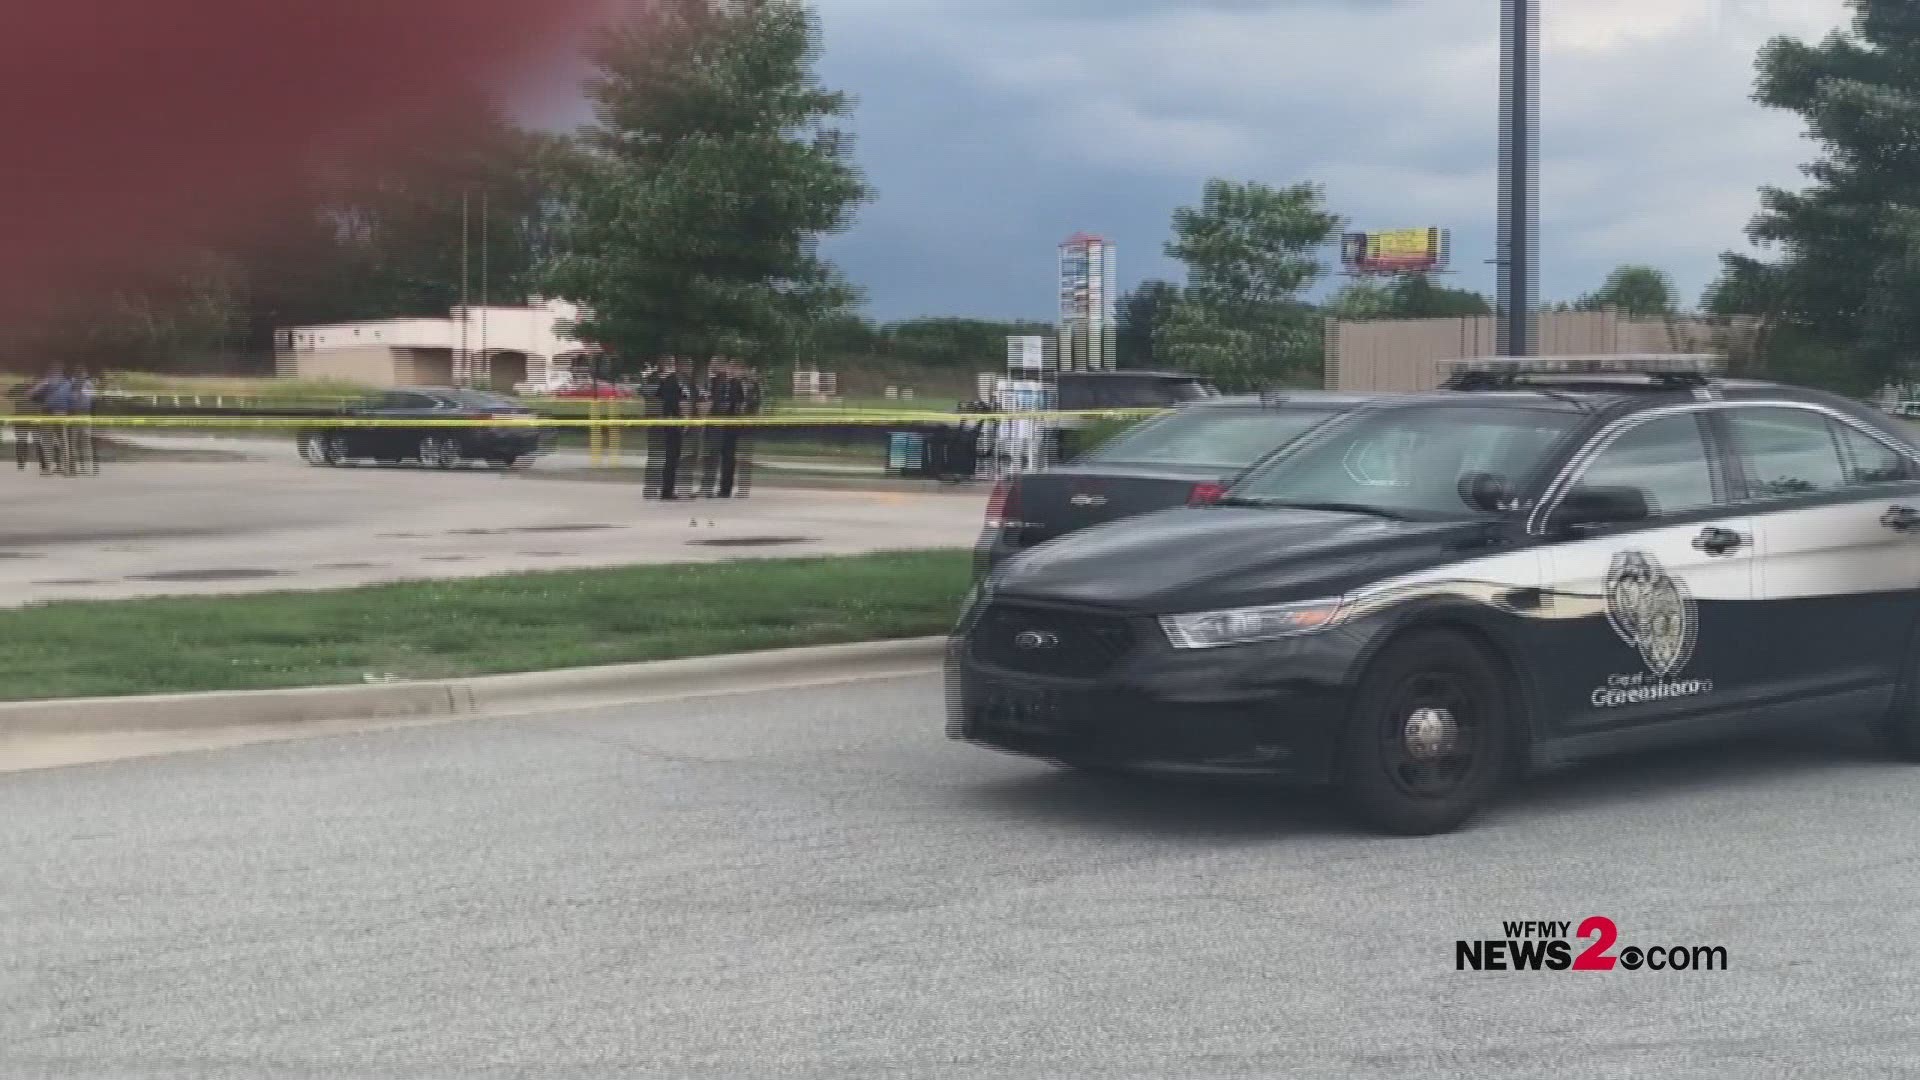 Greensboro police say a man died after being shot at the Murphy USA gas station at Pyramid Village.